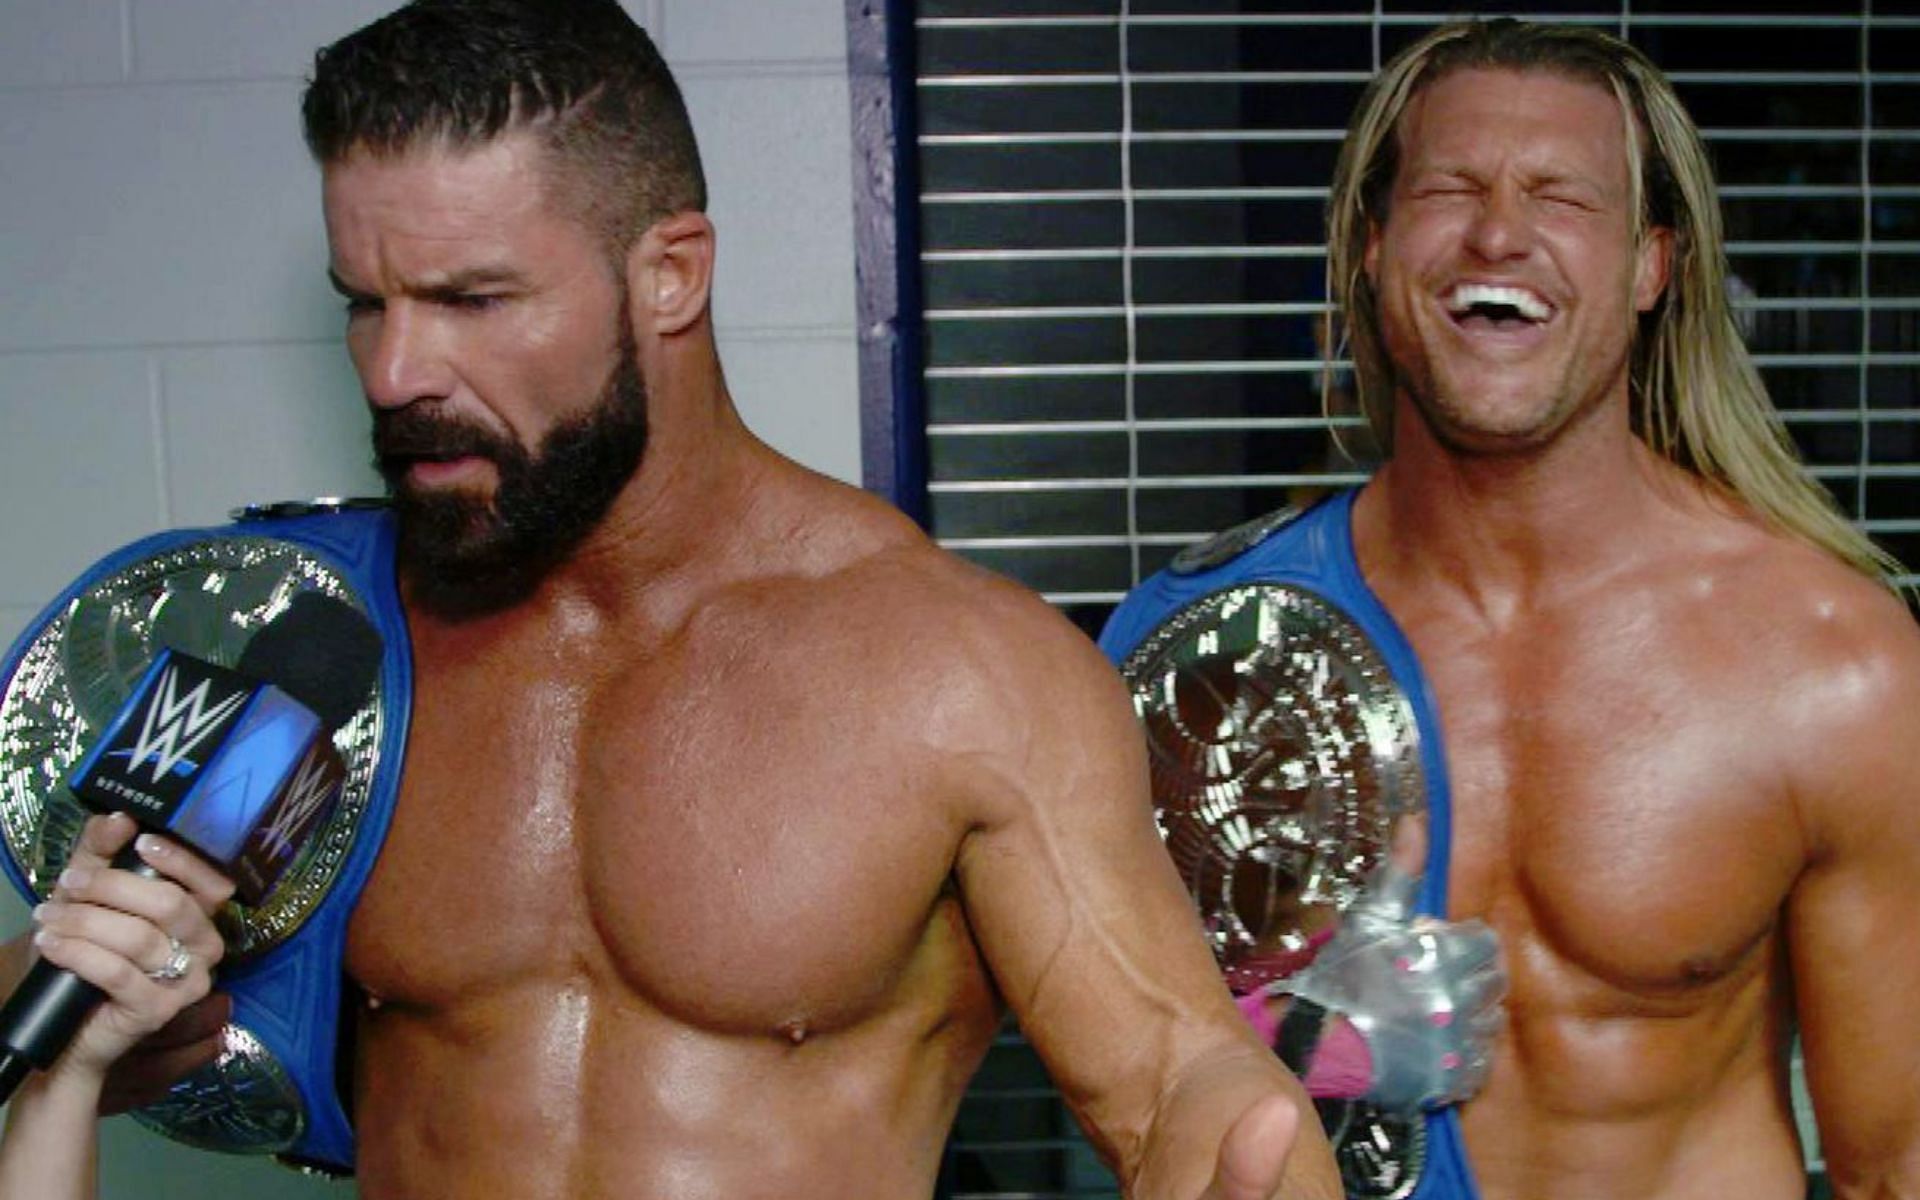 The Dirty Dawgs are former SmackDown Tag Team Champions